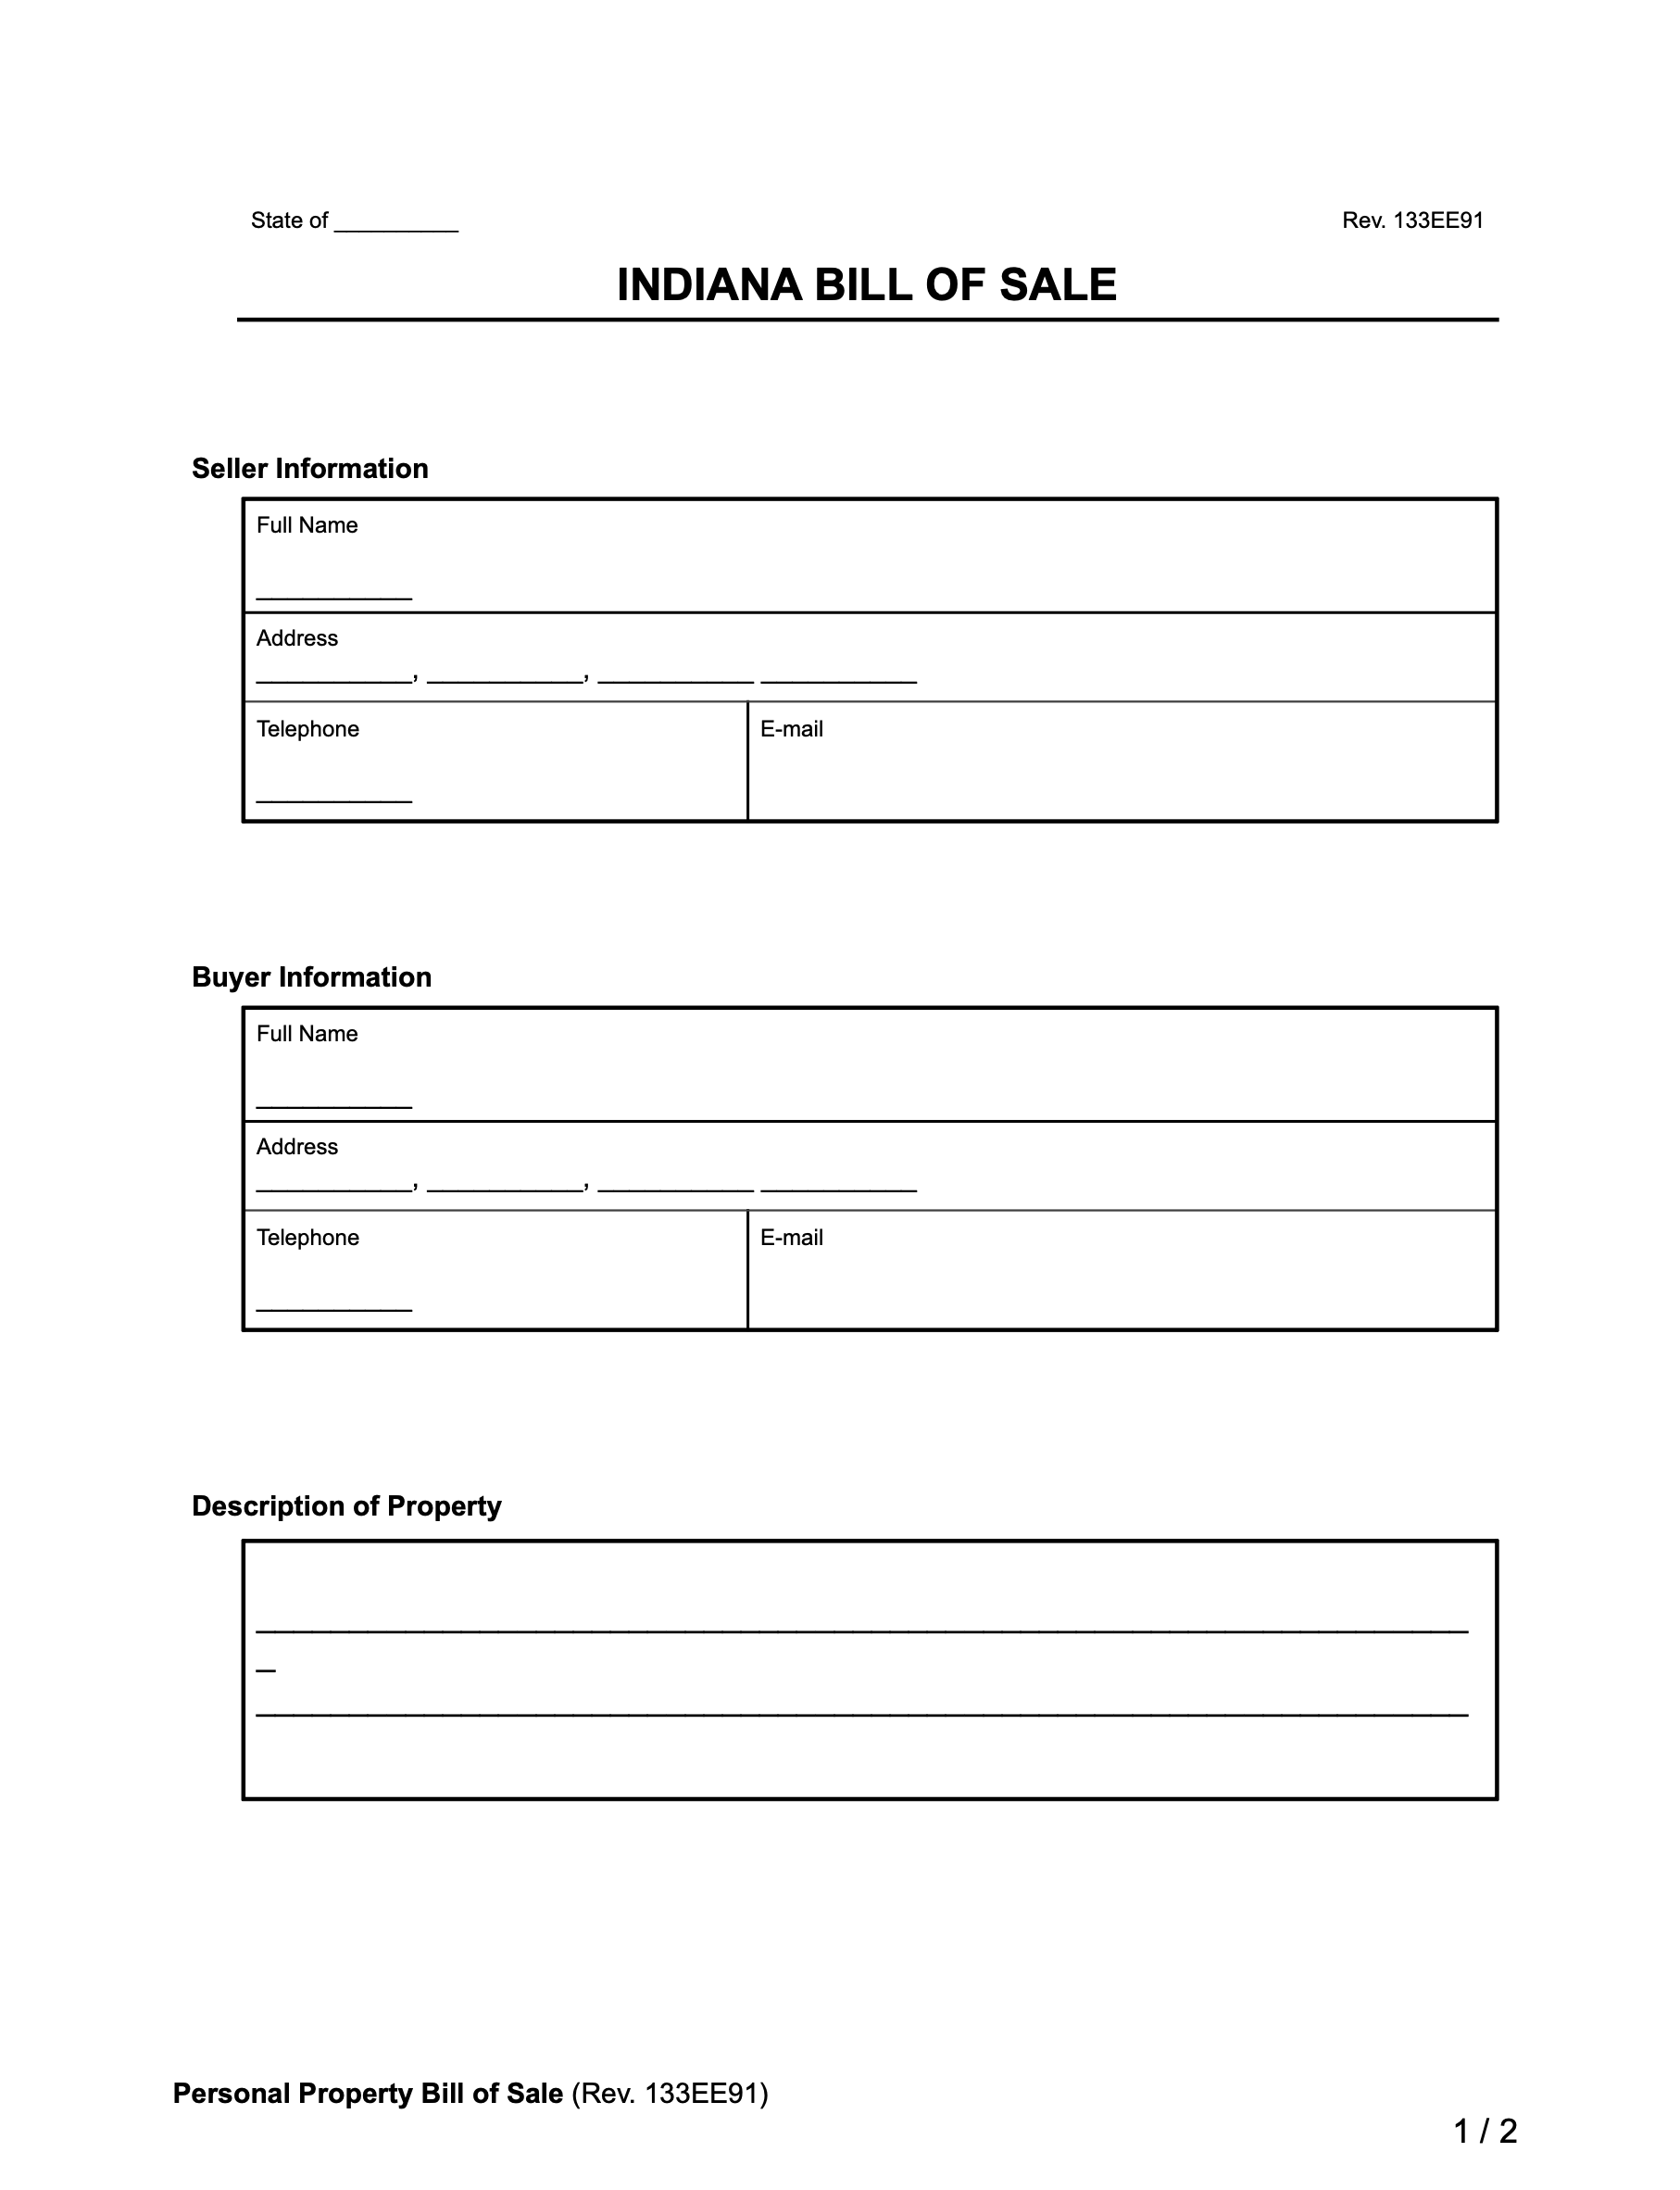 indiana bill of sale